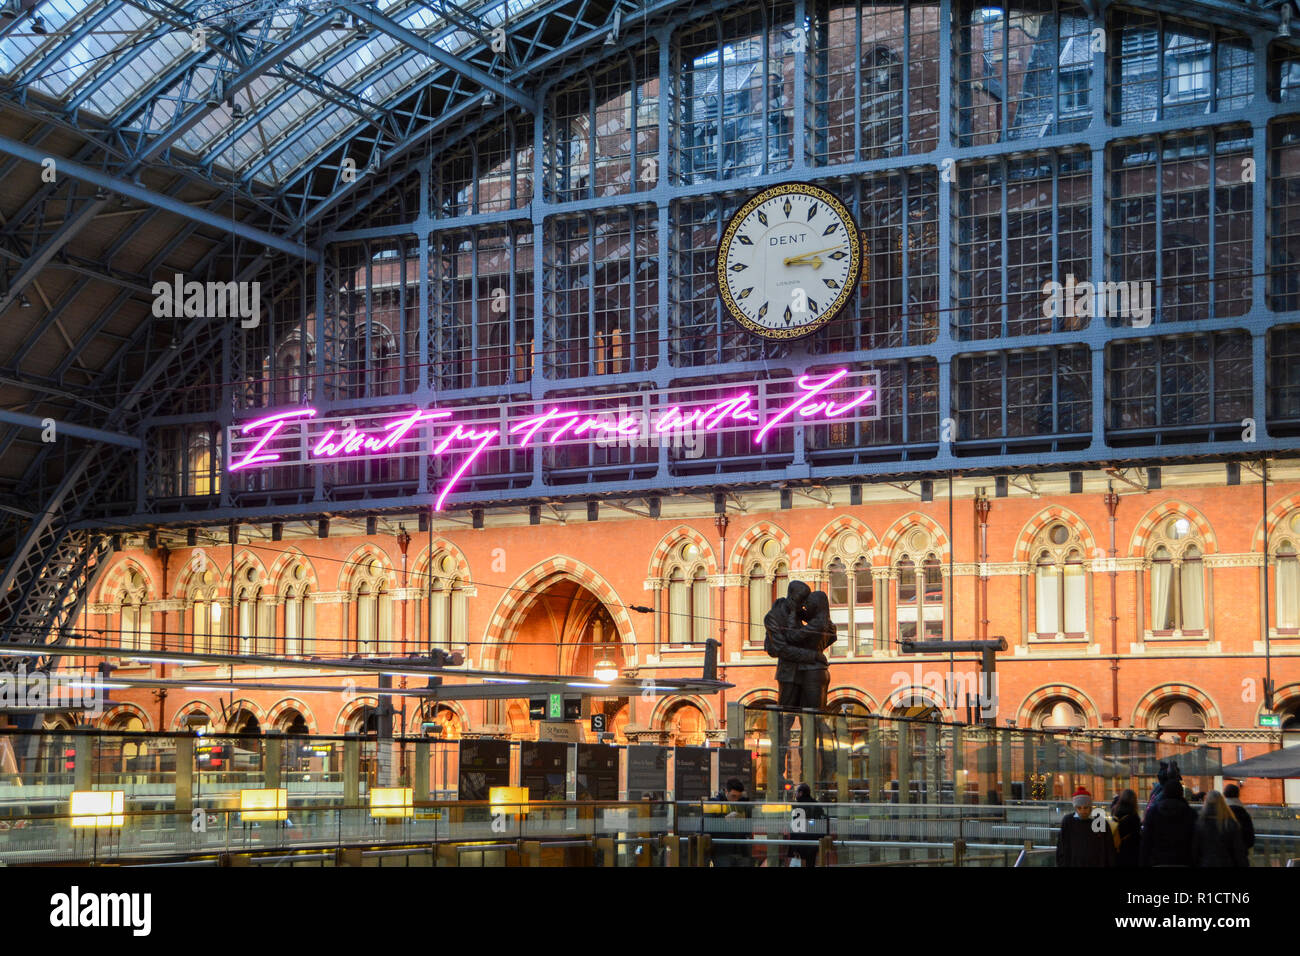 Tracey Emin's pink neon installation 'I Want My Time With You' next to the world-famous Dent clockface at St Pancras Station, London, England, U.K. Stock Photo